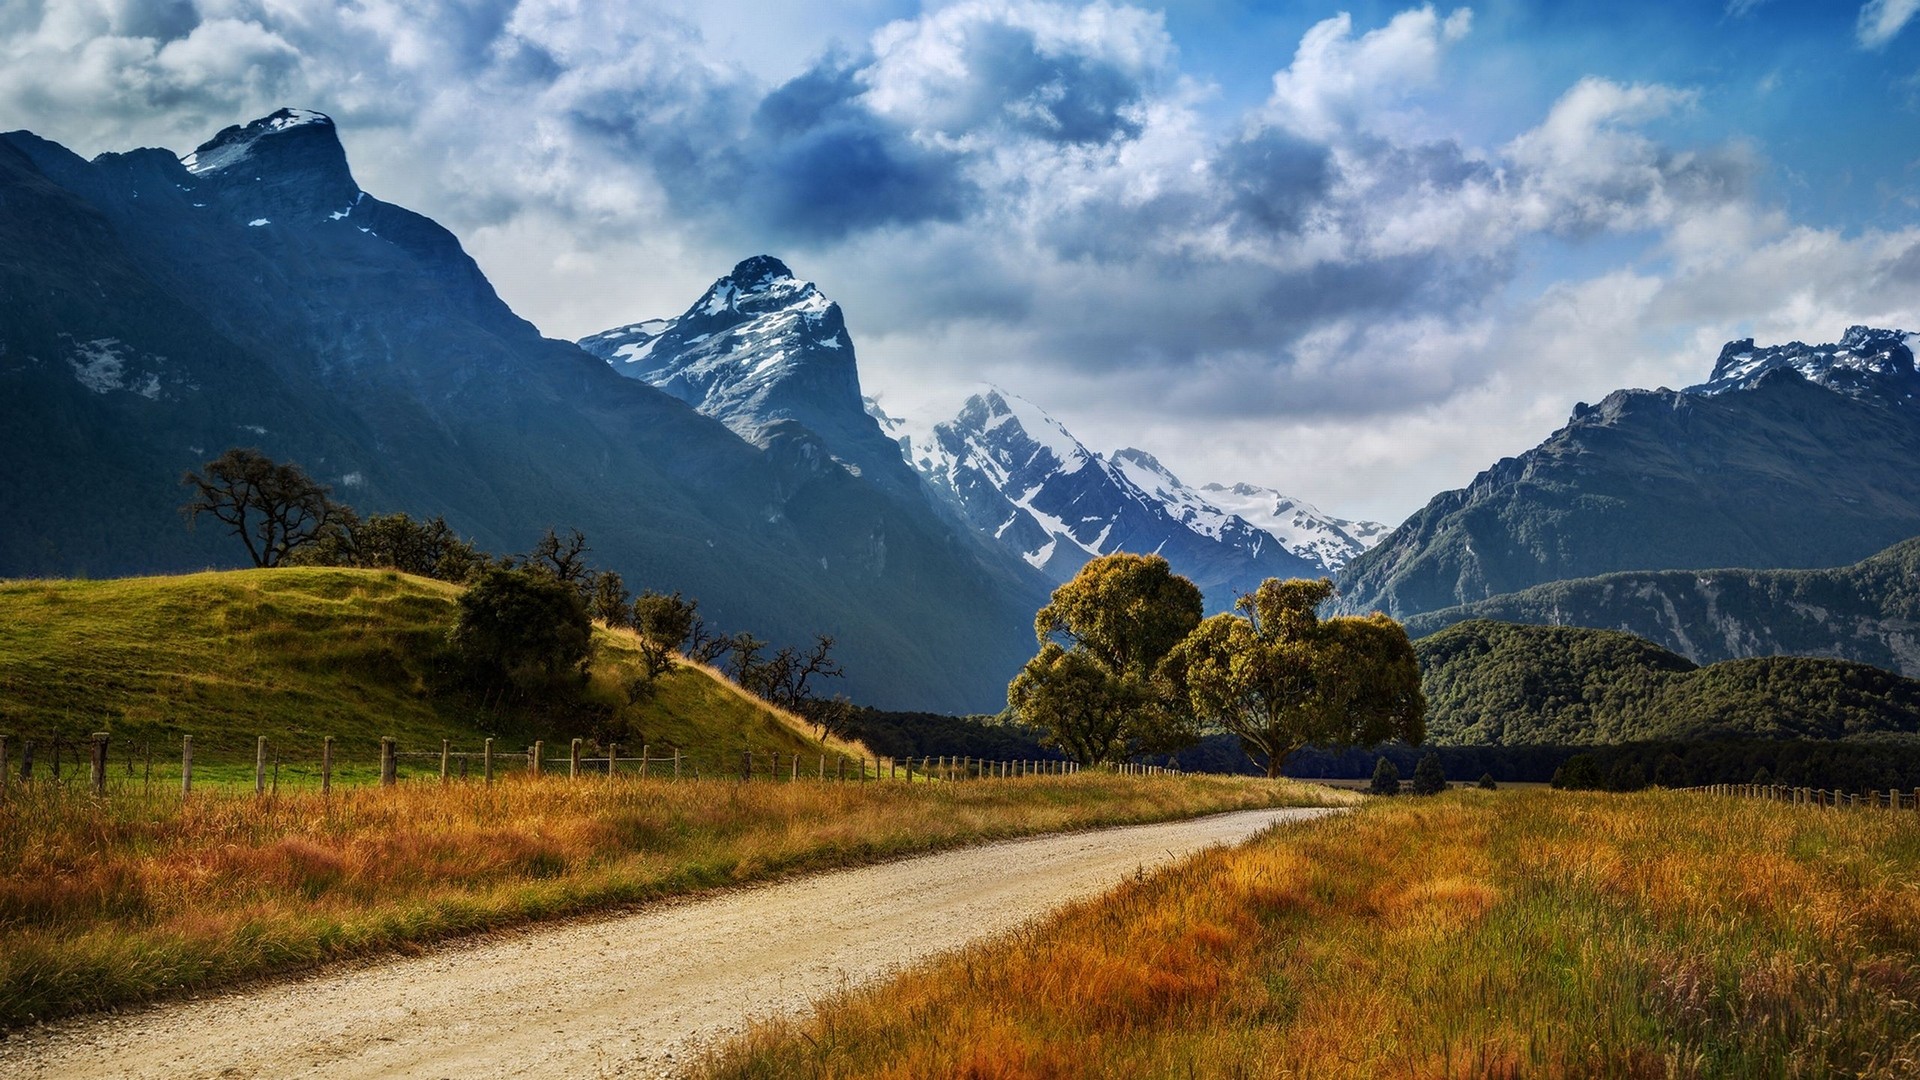 General 1920x1080 nature landscape mountains clouds New Zealand outdoors dirt road